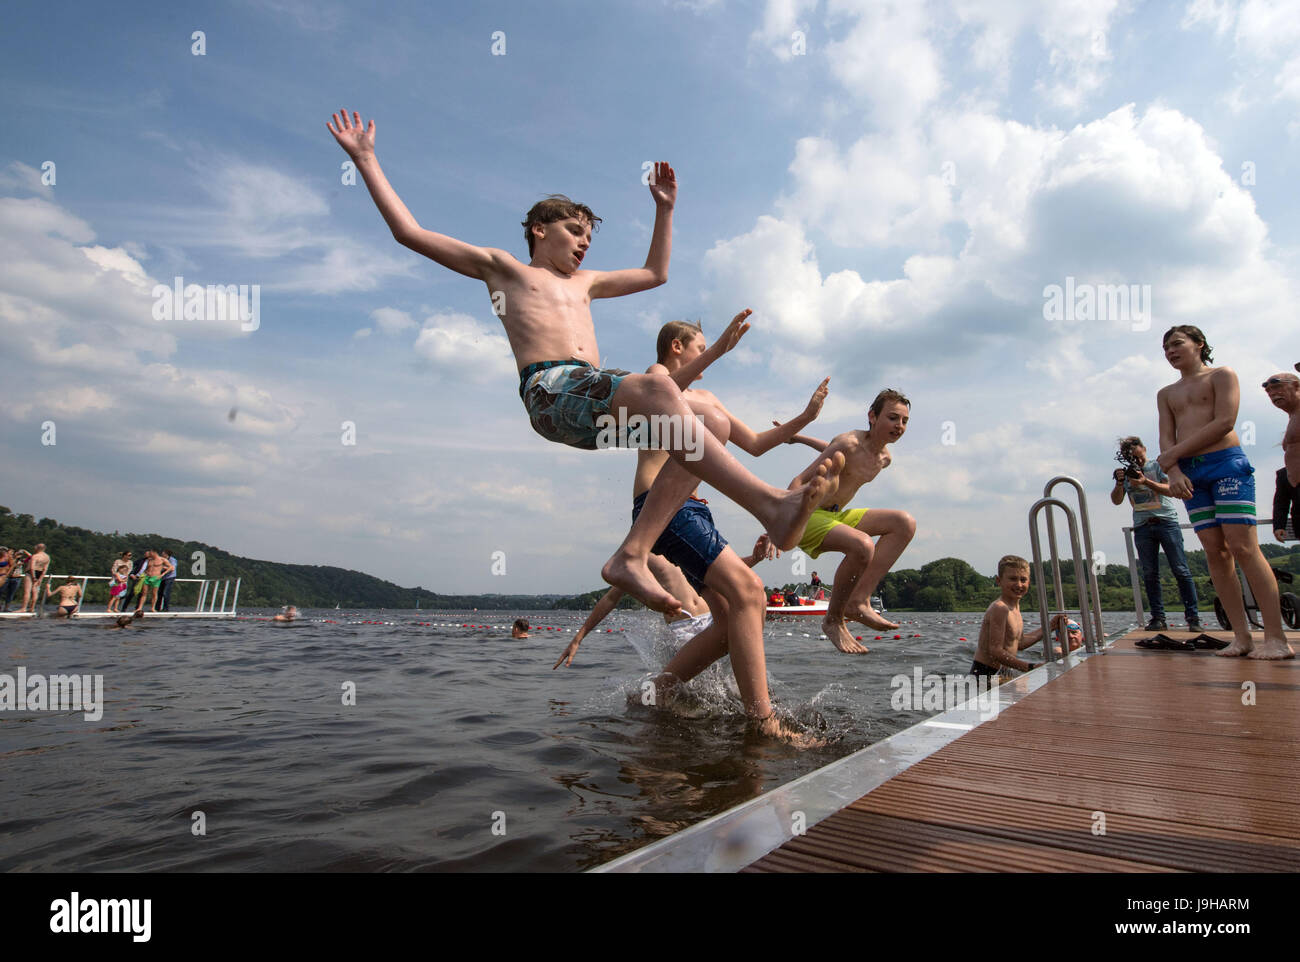 Essen Germany 23rd May 17 File Ben Micha Luca And Luca Jump Stock Photo Alamy